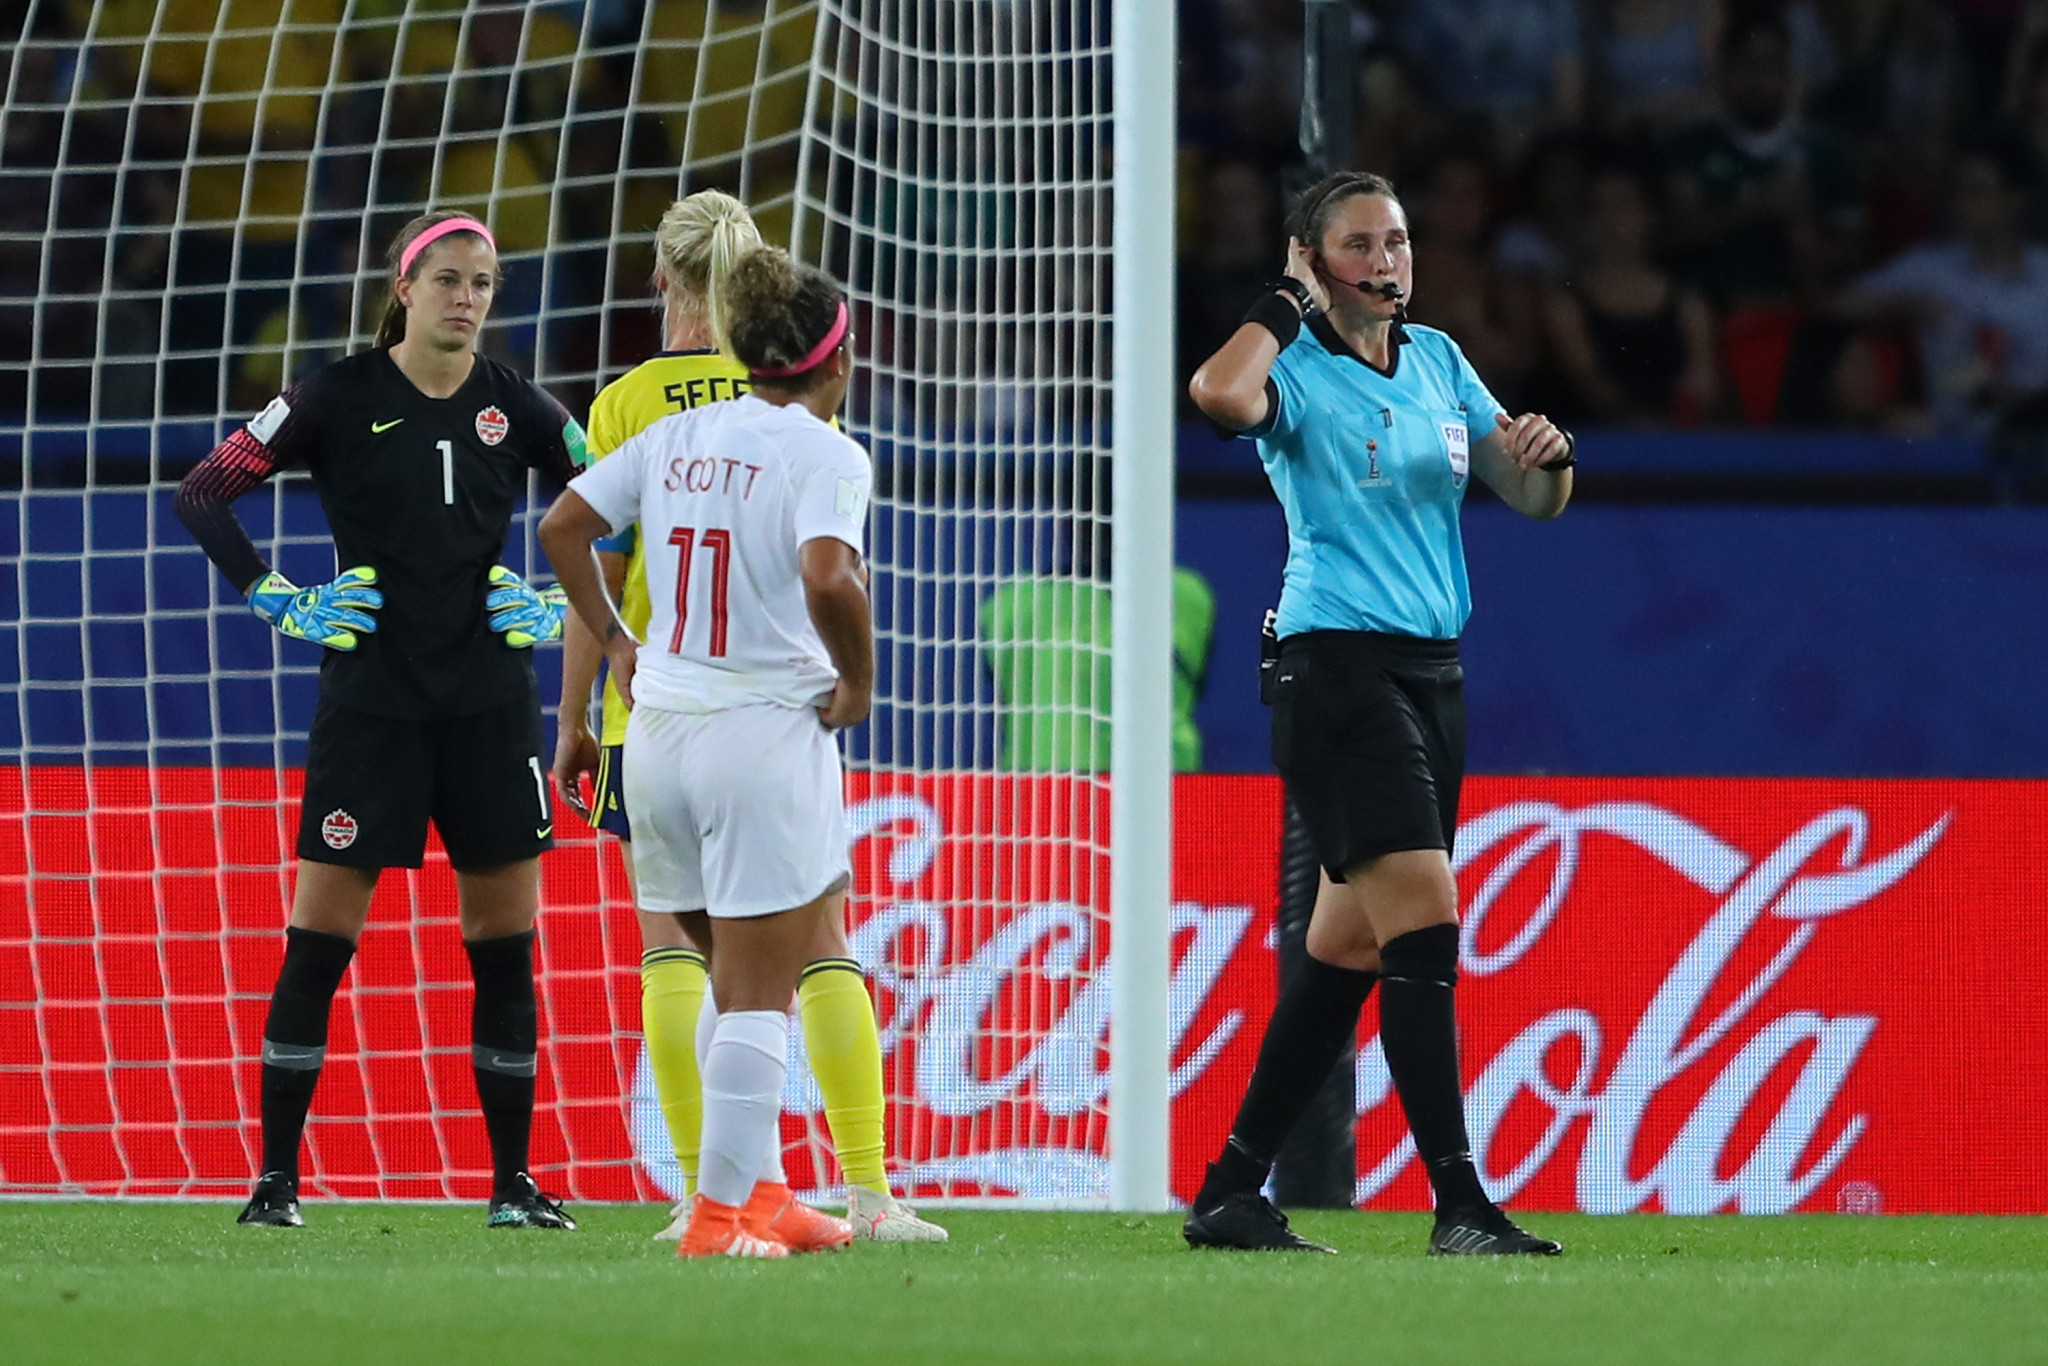 VAR was used by Australian referee Kate Jacewicz on a number of occasions, including after the final whistle had sounded about a potential handball by Sweden's Linda Sembrant in the box ©Getty Images